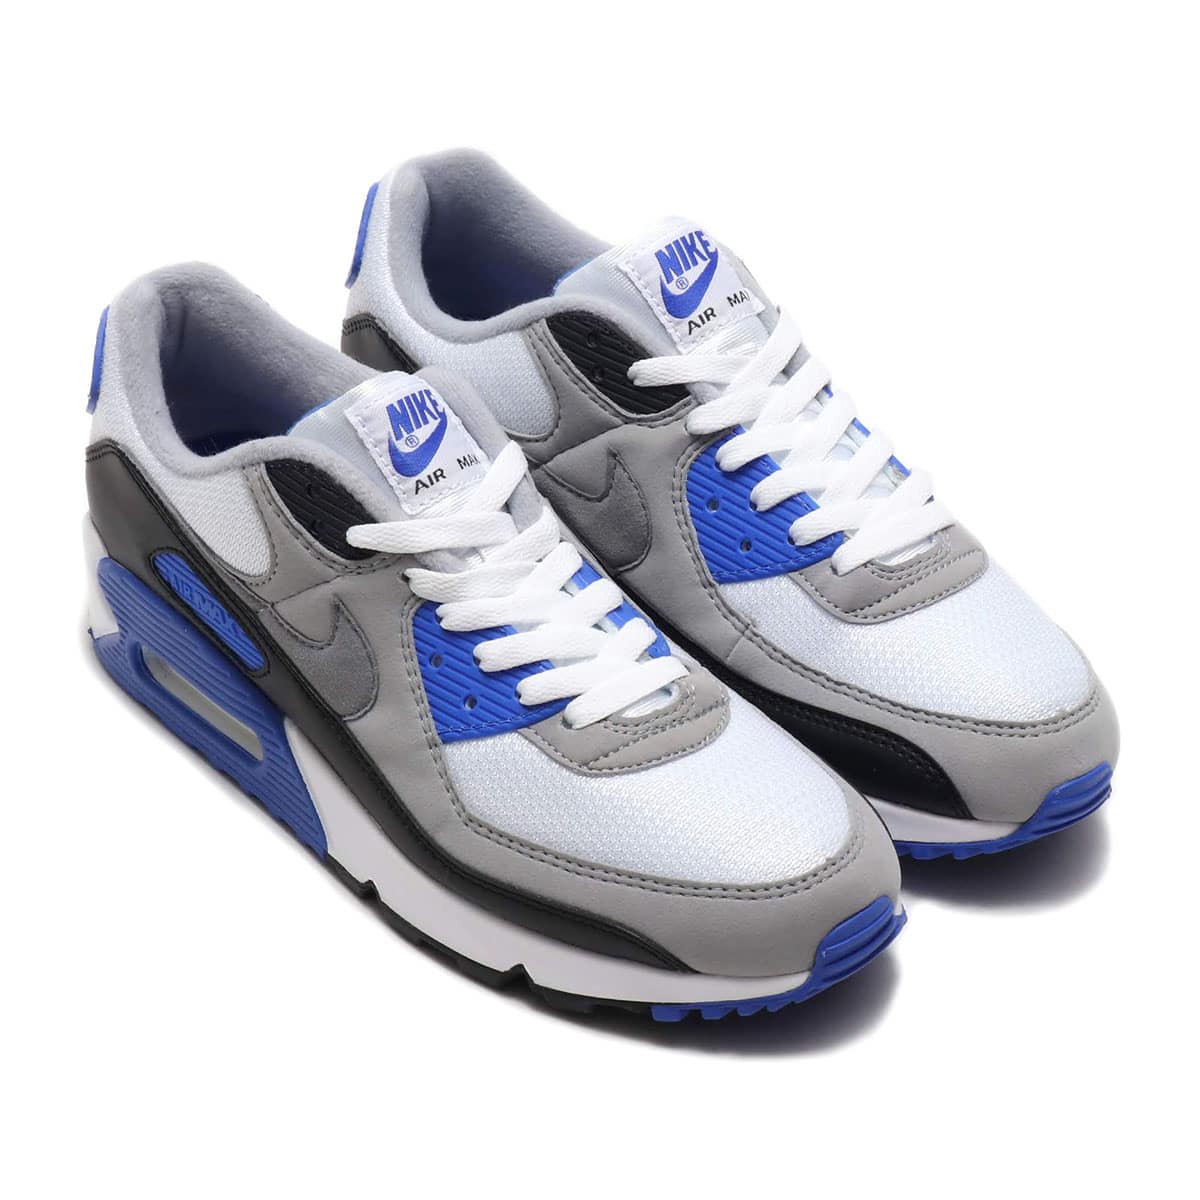 NIKE AIR MAX 90 WHITE/PARTICLE GREY-HYPER ROYAL-BLACK 20SP-S_photo_large